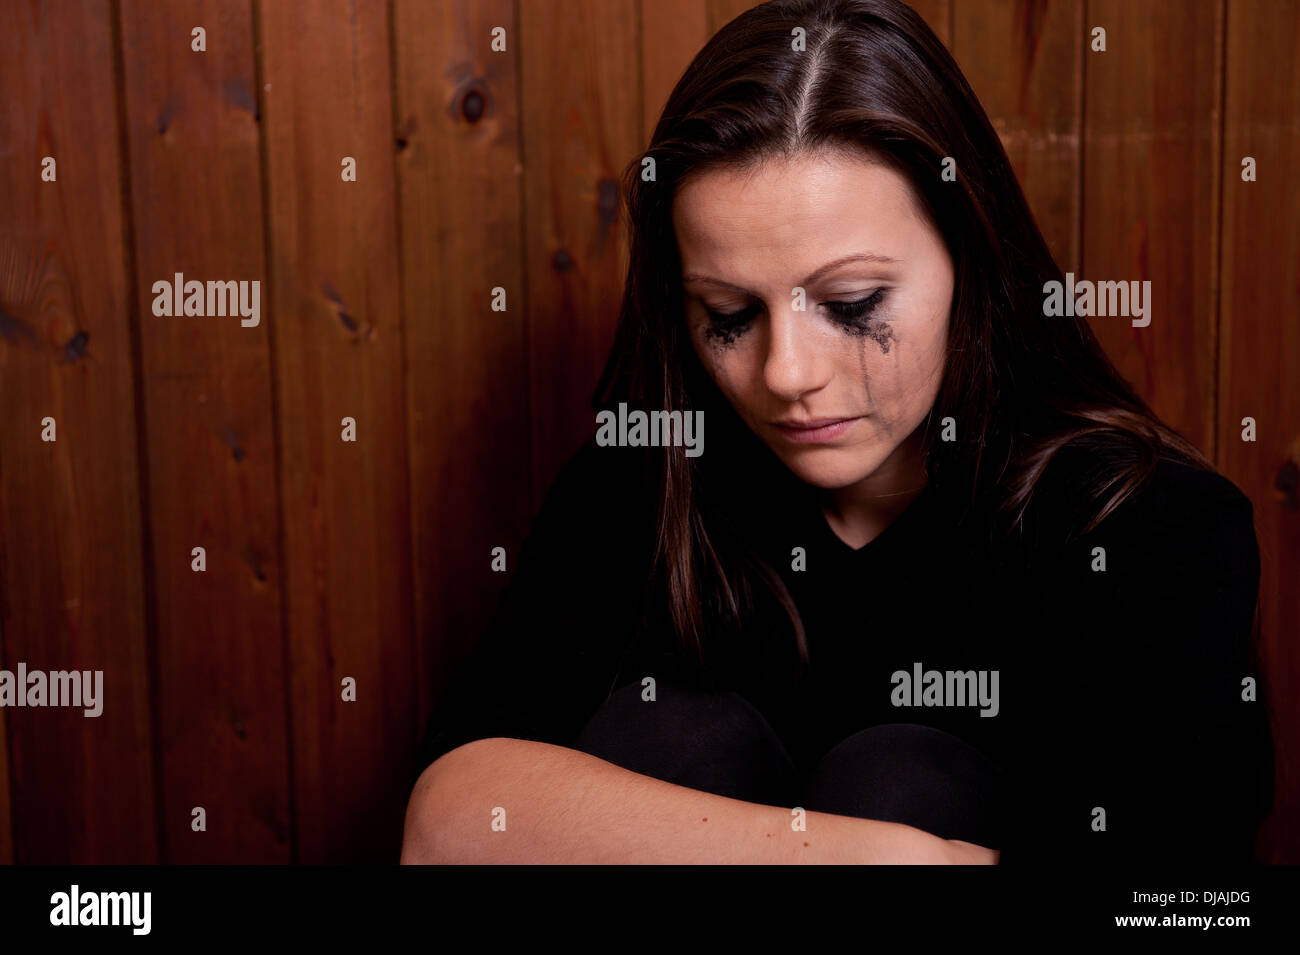 Upset young woman with her eye make-up running down her face from crying. Stock Photo